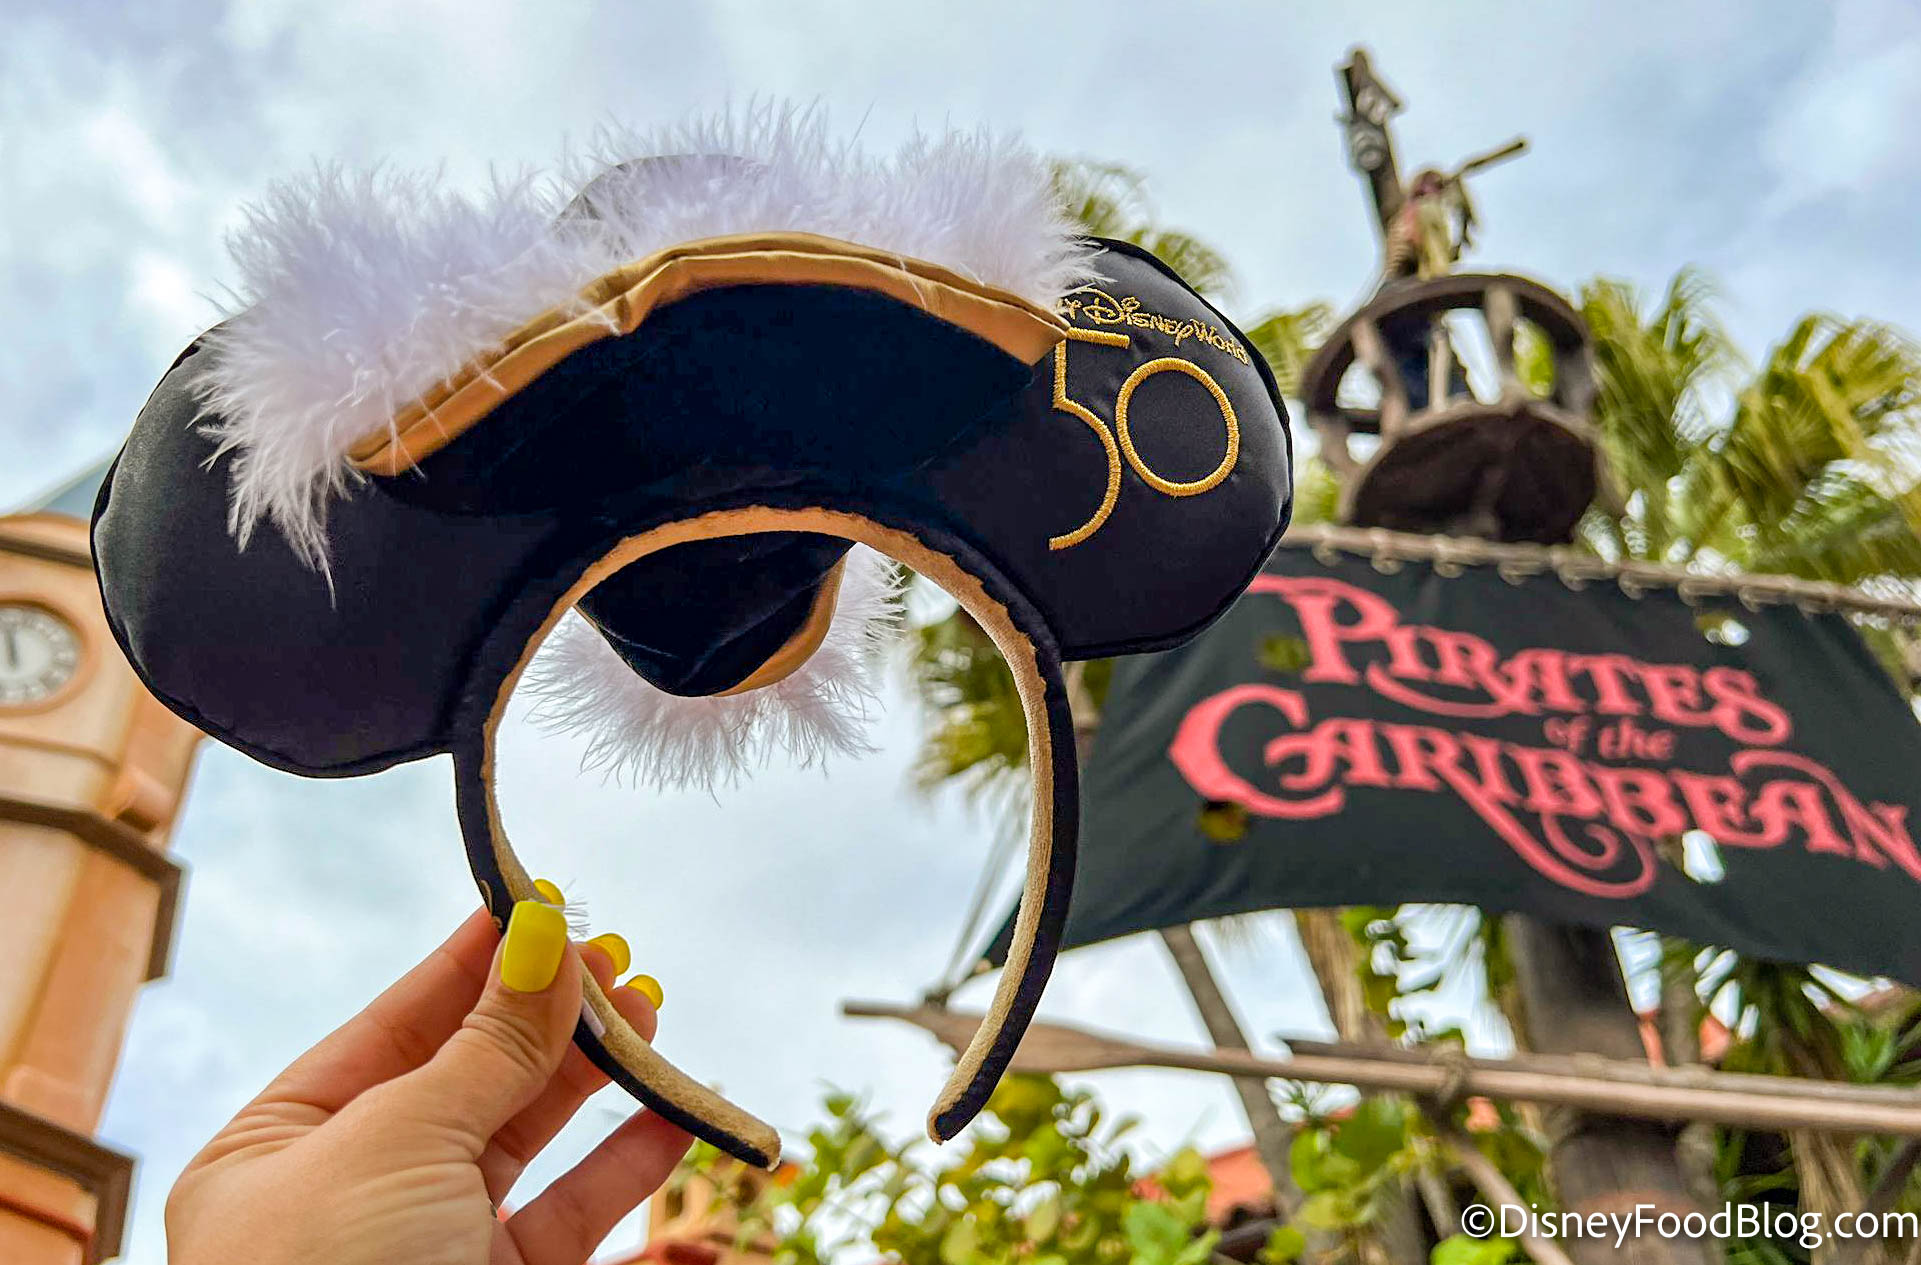 Pirates of the Caribbean Attraction Inspired Mouse Ears